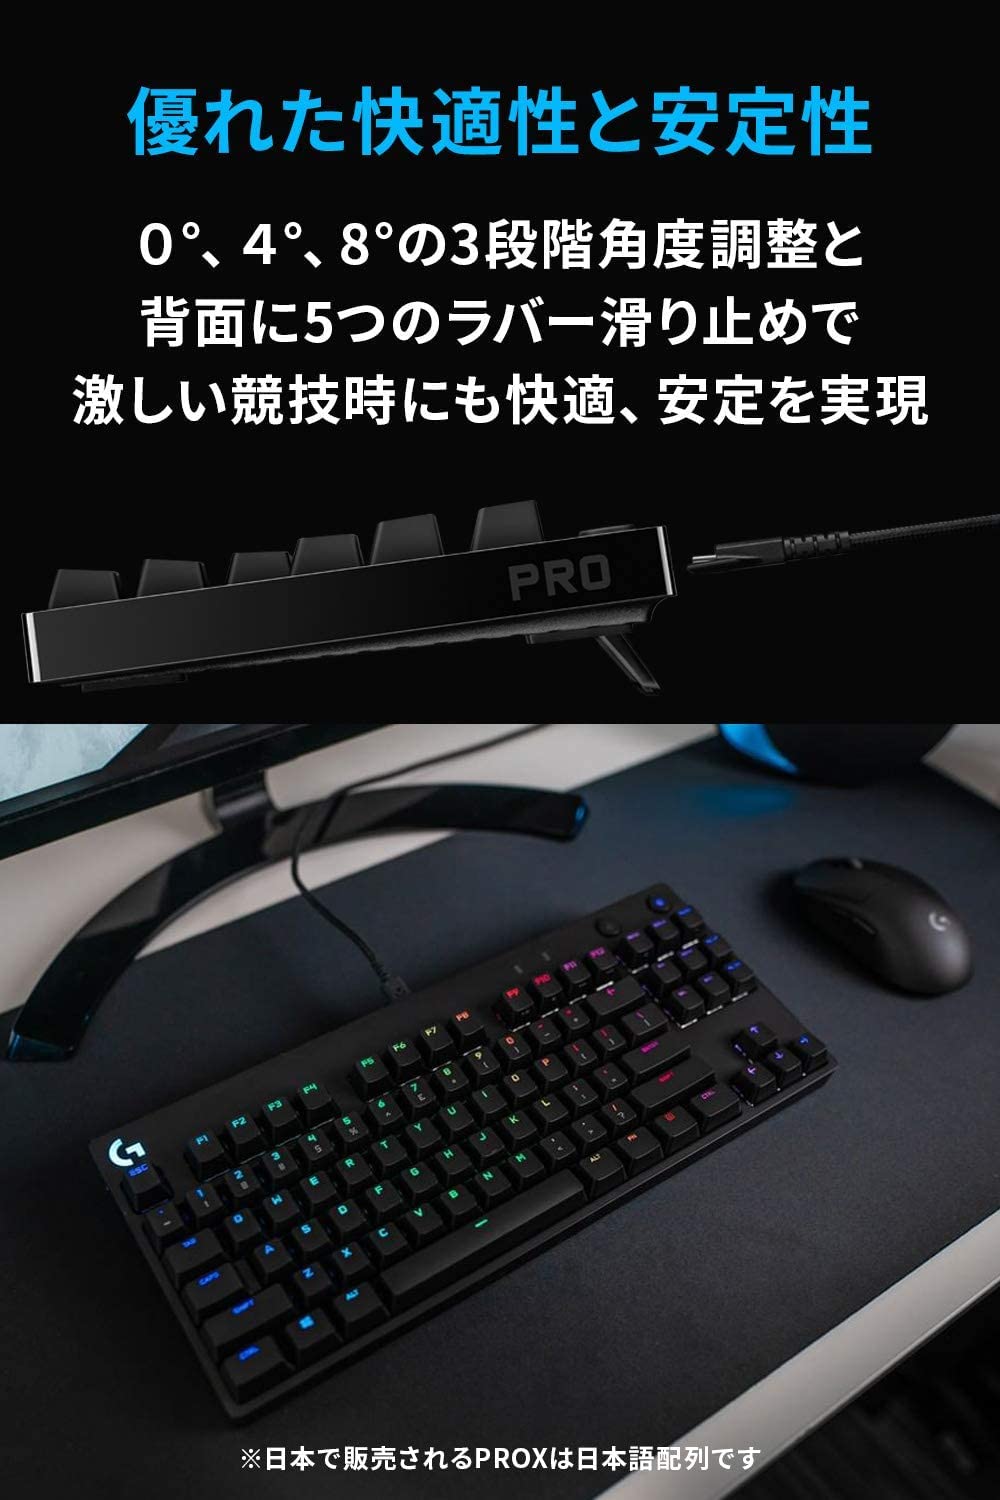 Logicool G PRO Gaming Keyboard, Numeric Keypadless, GX Switch, Linear Wired Mechanical Keyboard, Quiet, Japanese Layout, RGB Detachable Cable, G-PKB-002LNd, Genuine Domestic Product, 1 Year Manufacturer's Warranty *Cannot be replaced with GX switch sold s